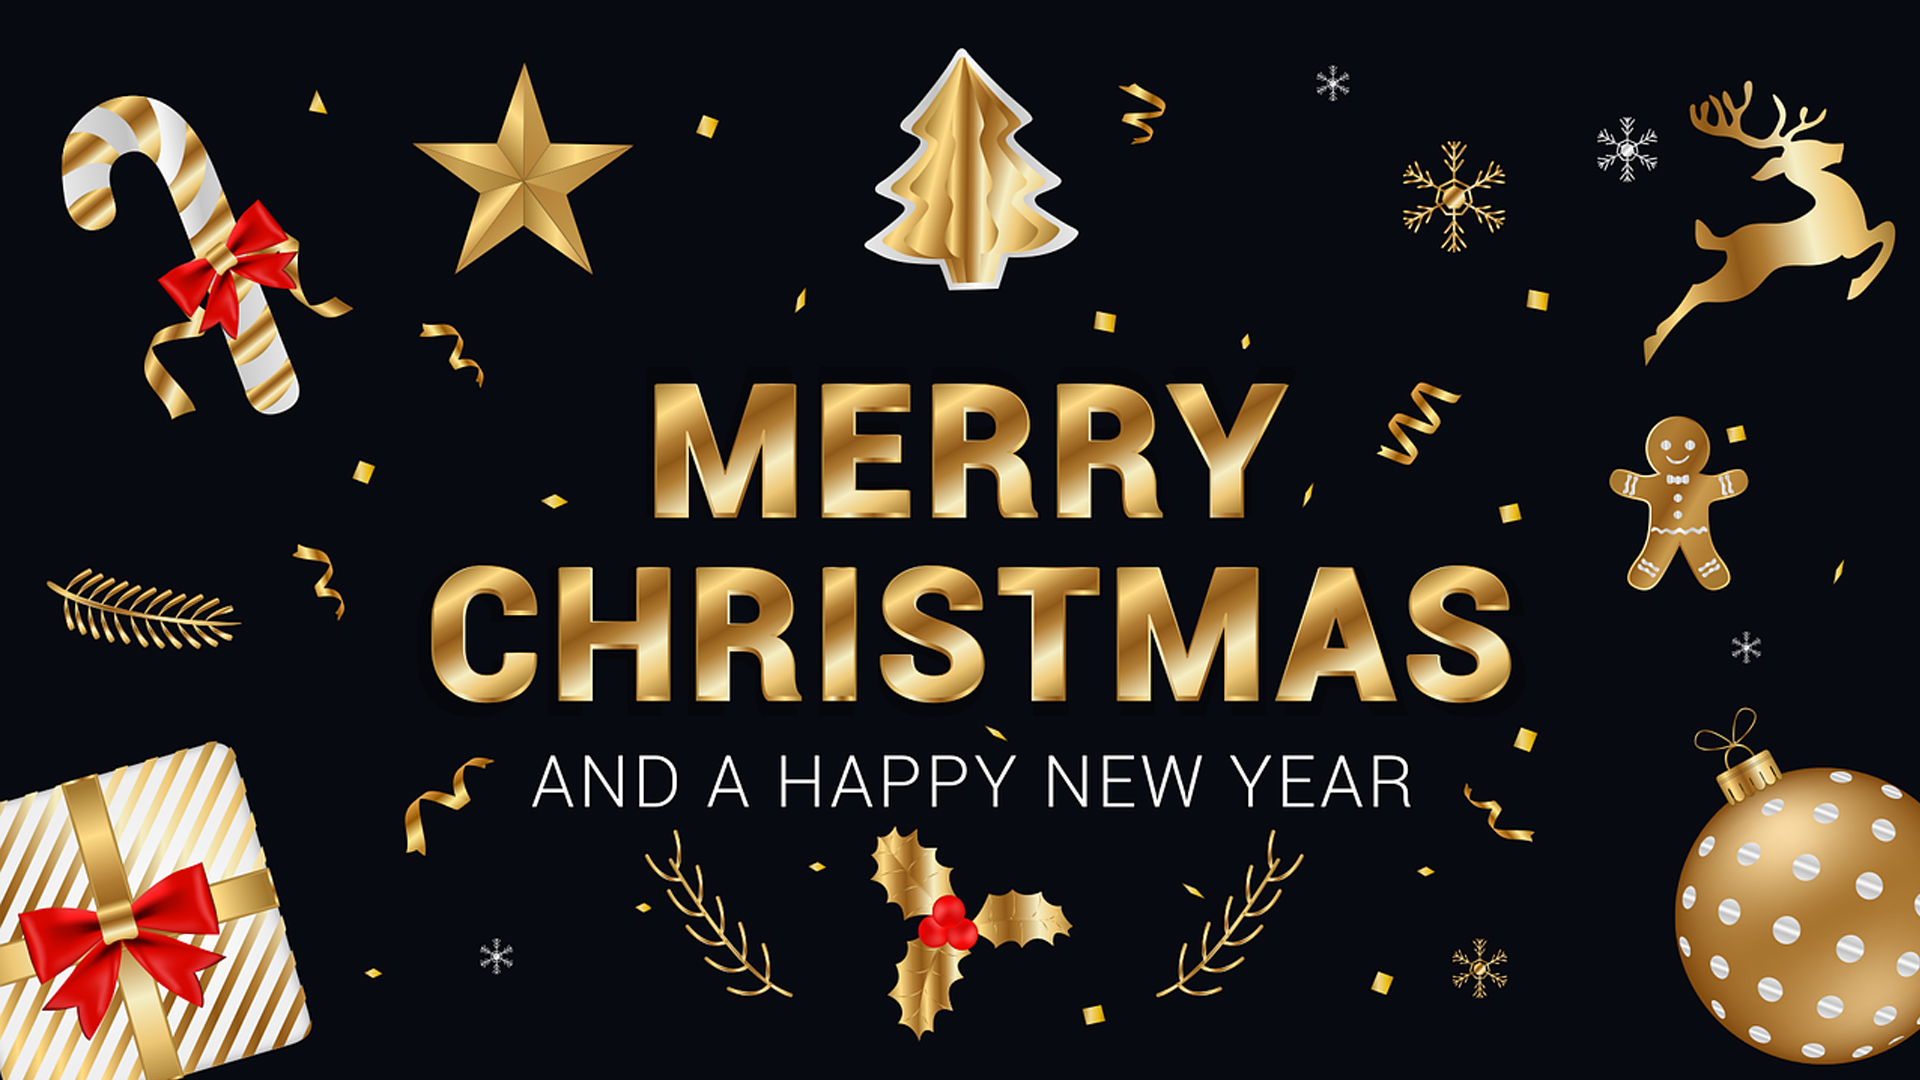 Black background with white and gold christmas elements placed all around the edges of the graphic. For example, jumping reindeer, star, confetti, candy cane, tree, ornament, presents and tree stems. Merry Christmas and a Happy New Year is written in the middle with emphasis on Merry Christmas in gold.